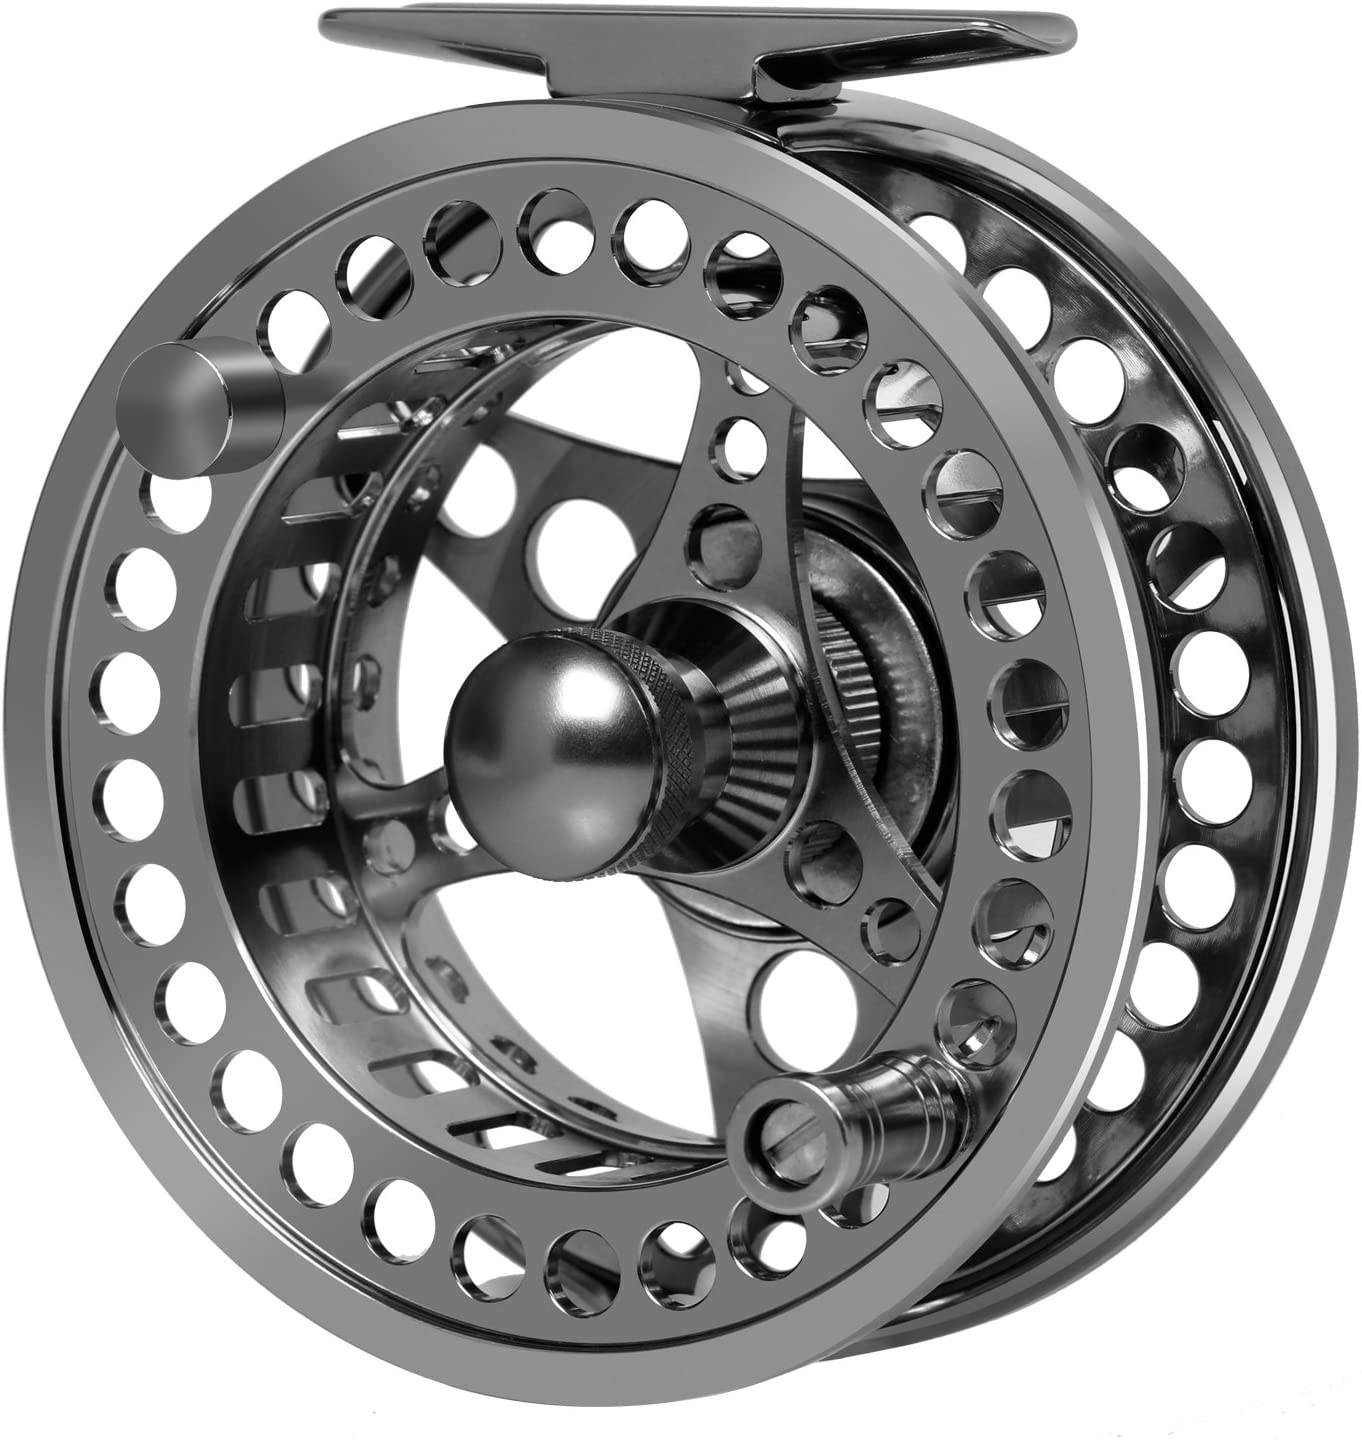 Goture 3/4 5/6 7/8 9/10 WT Fly Fishing Reel 2+1BB CNC Machined